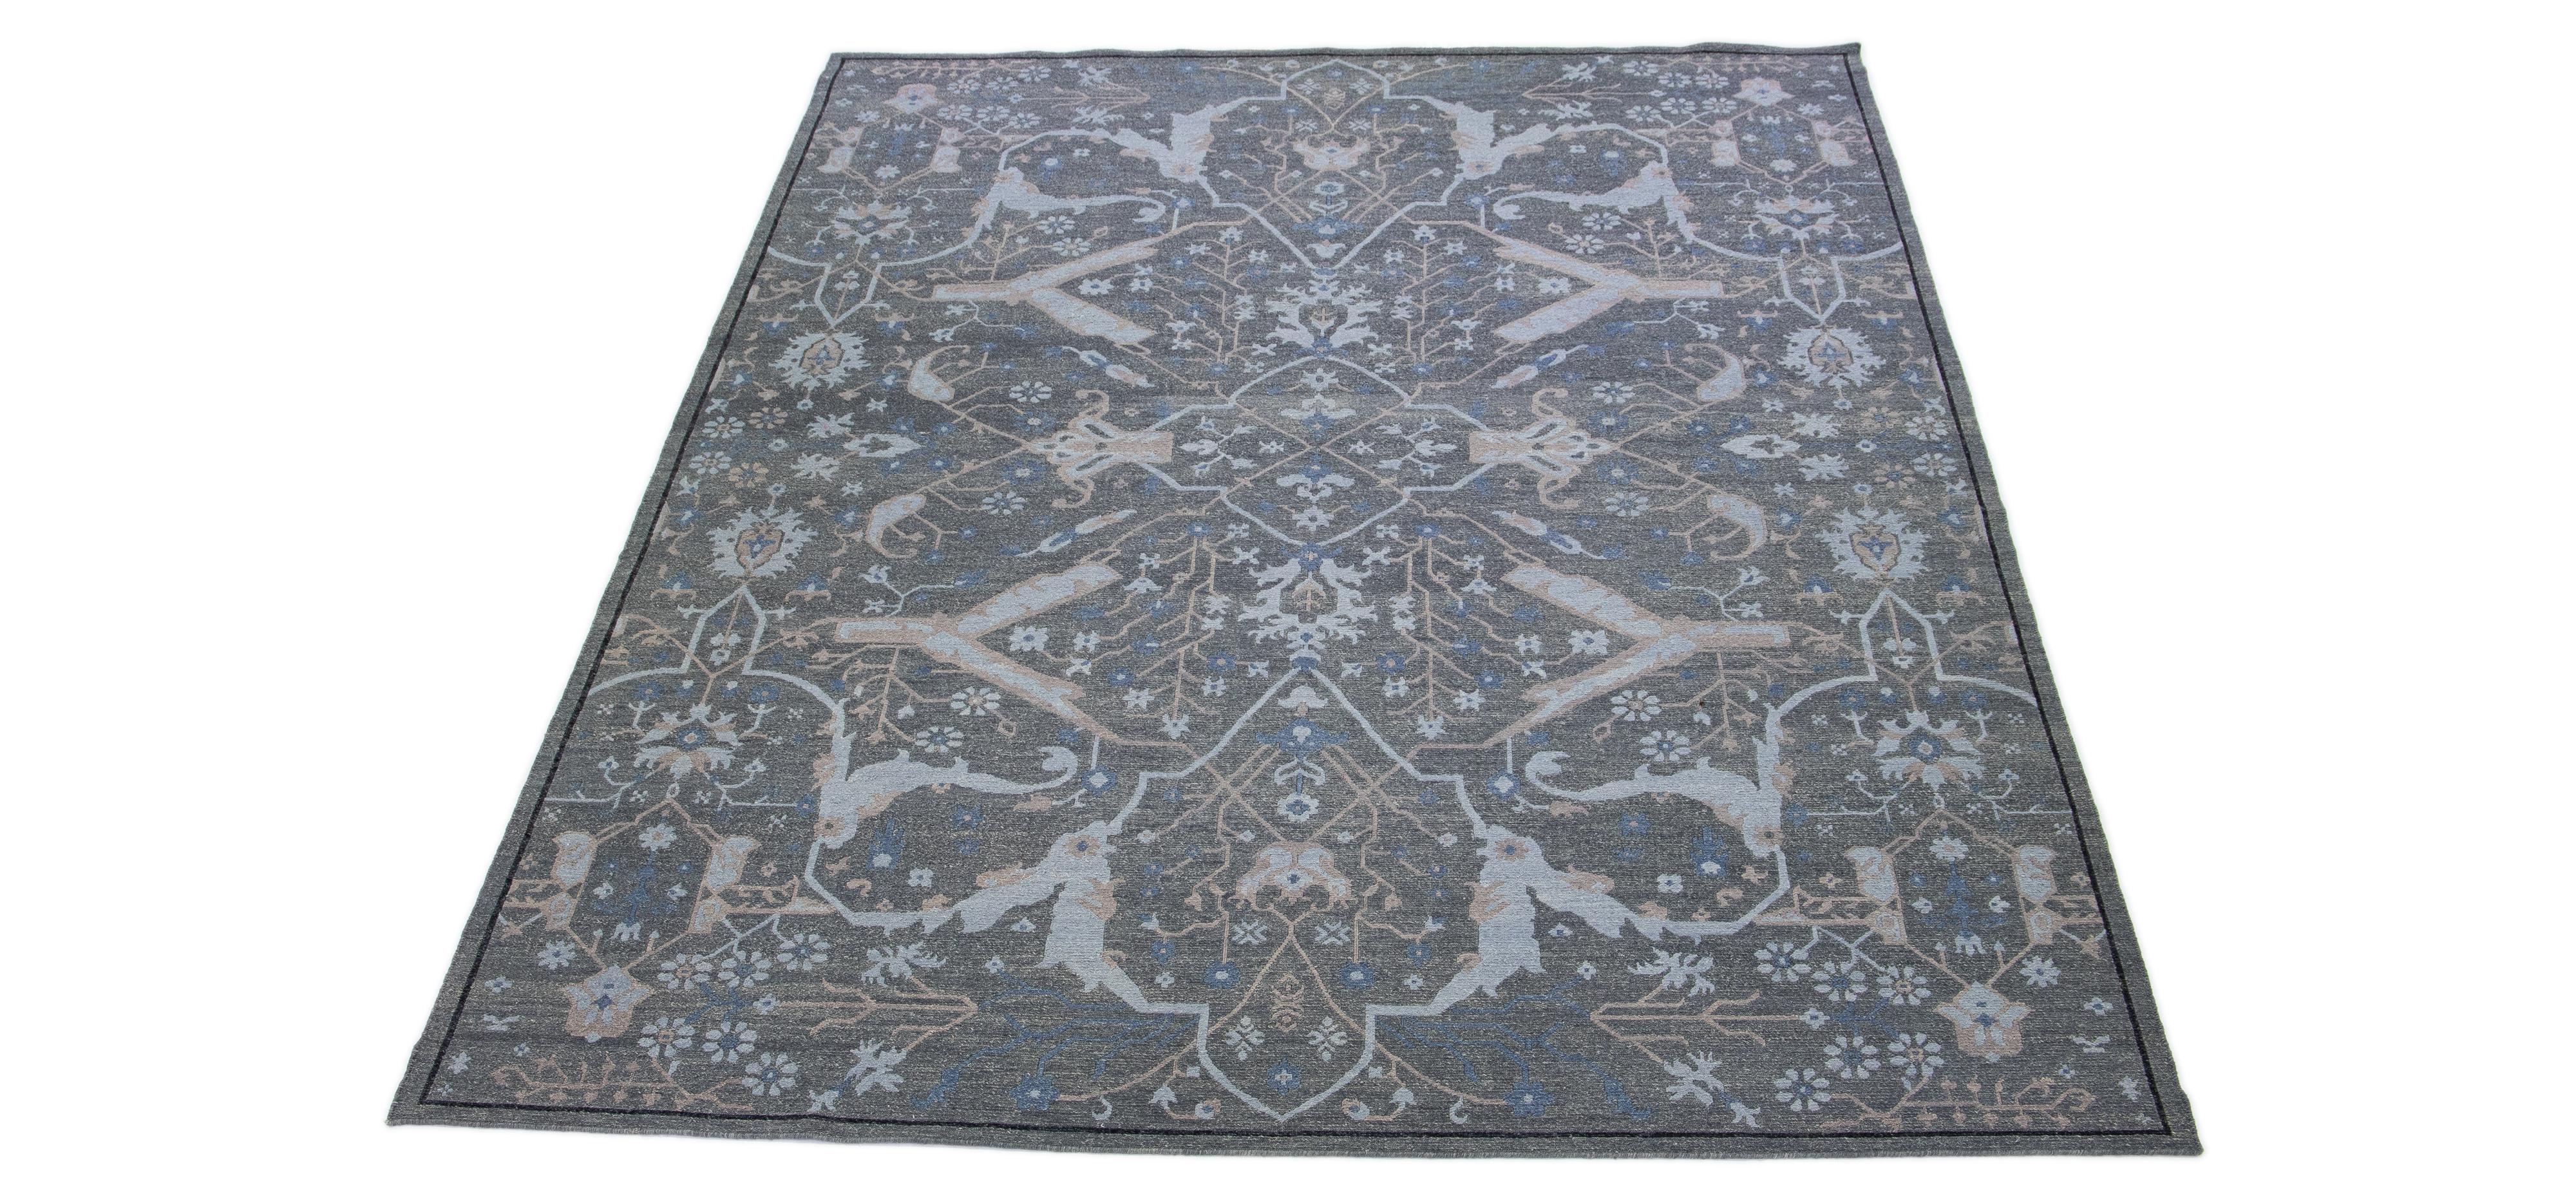 Beautiful Modern Soumak hand knotted wool rug with a gray field. This piece has accents in a gorgeous all-over geometric design in blue and brown.

This rug measures 10' x 13'9